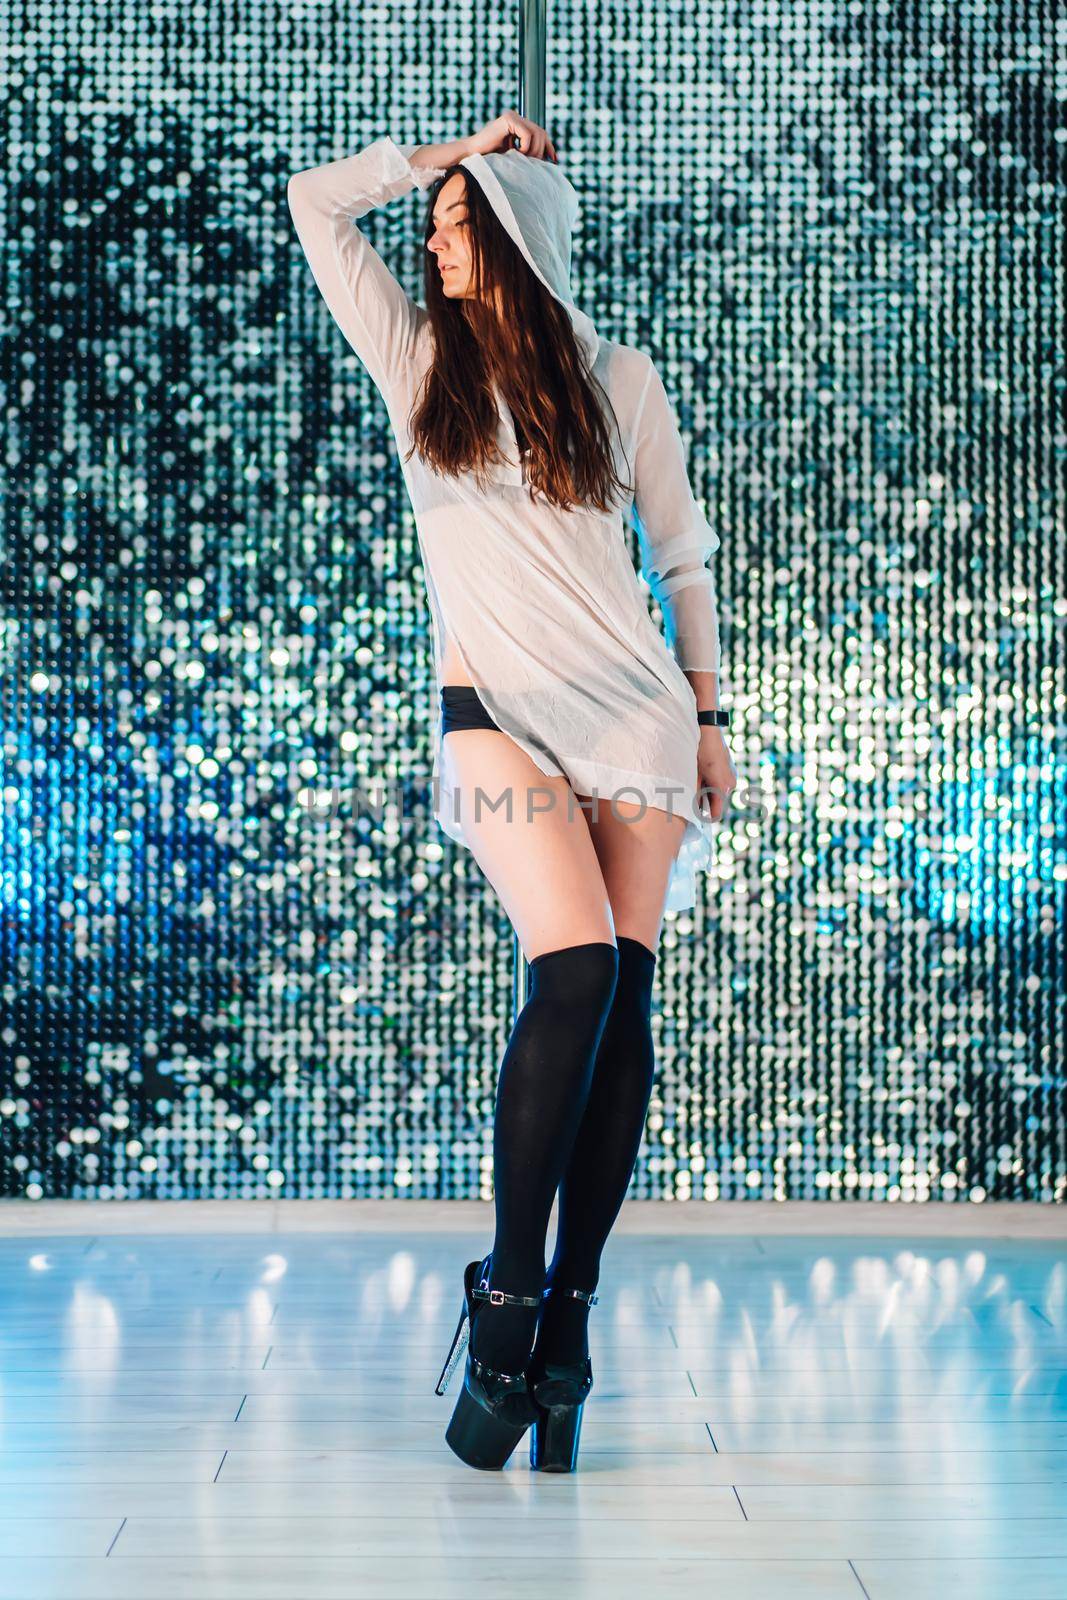 Alluring woman with long hair posing with pylon on shining wall background. Pole-dance, sexy, temptation concept. High quality photo